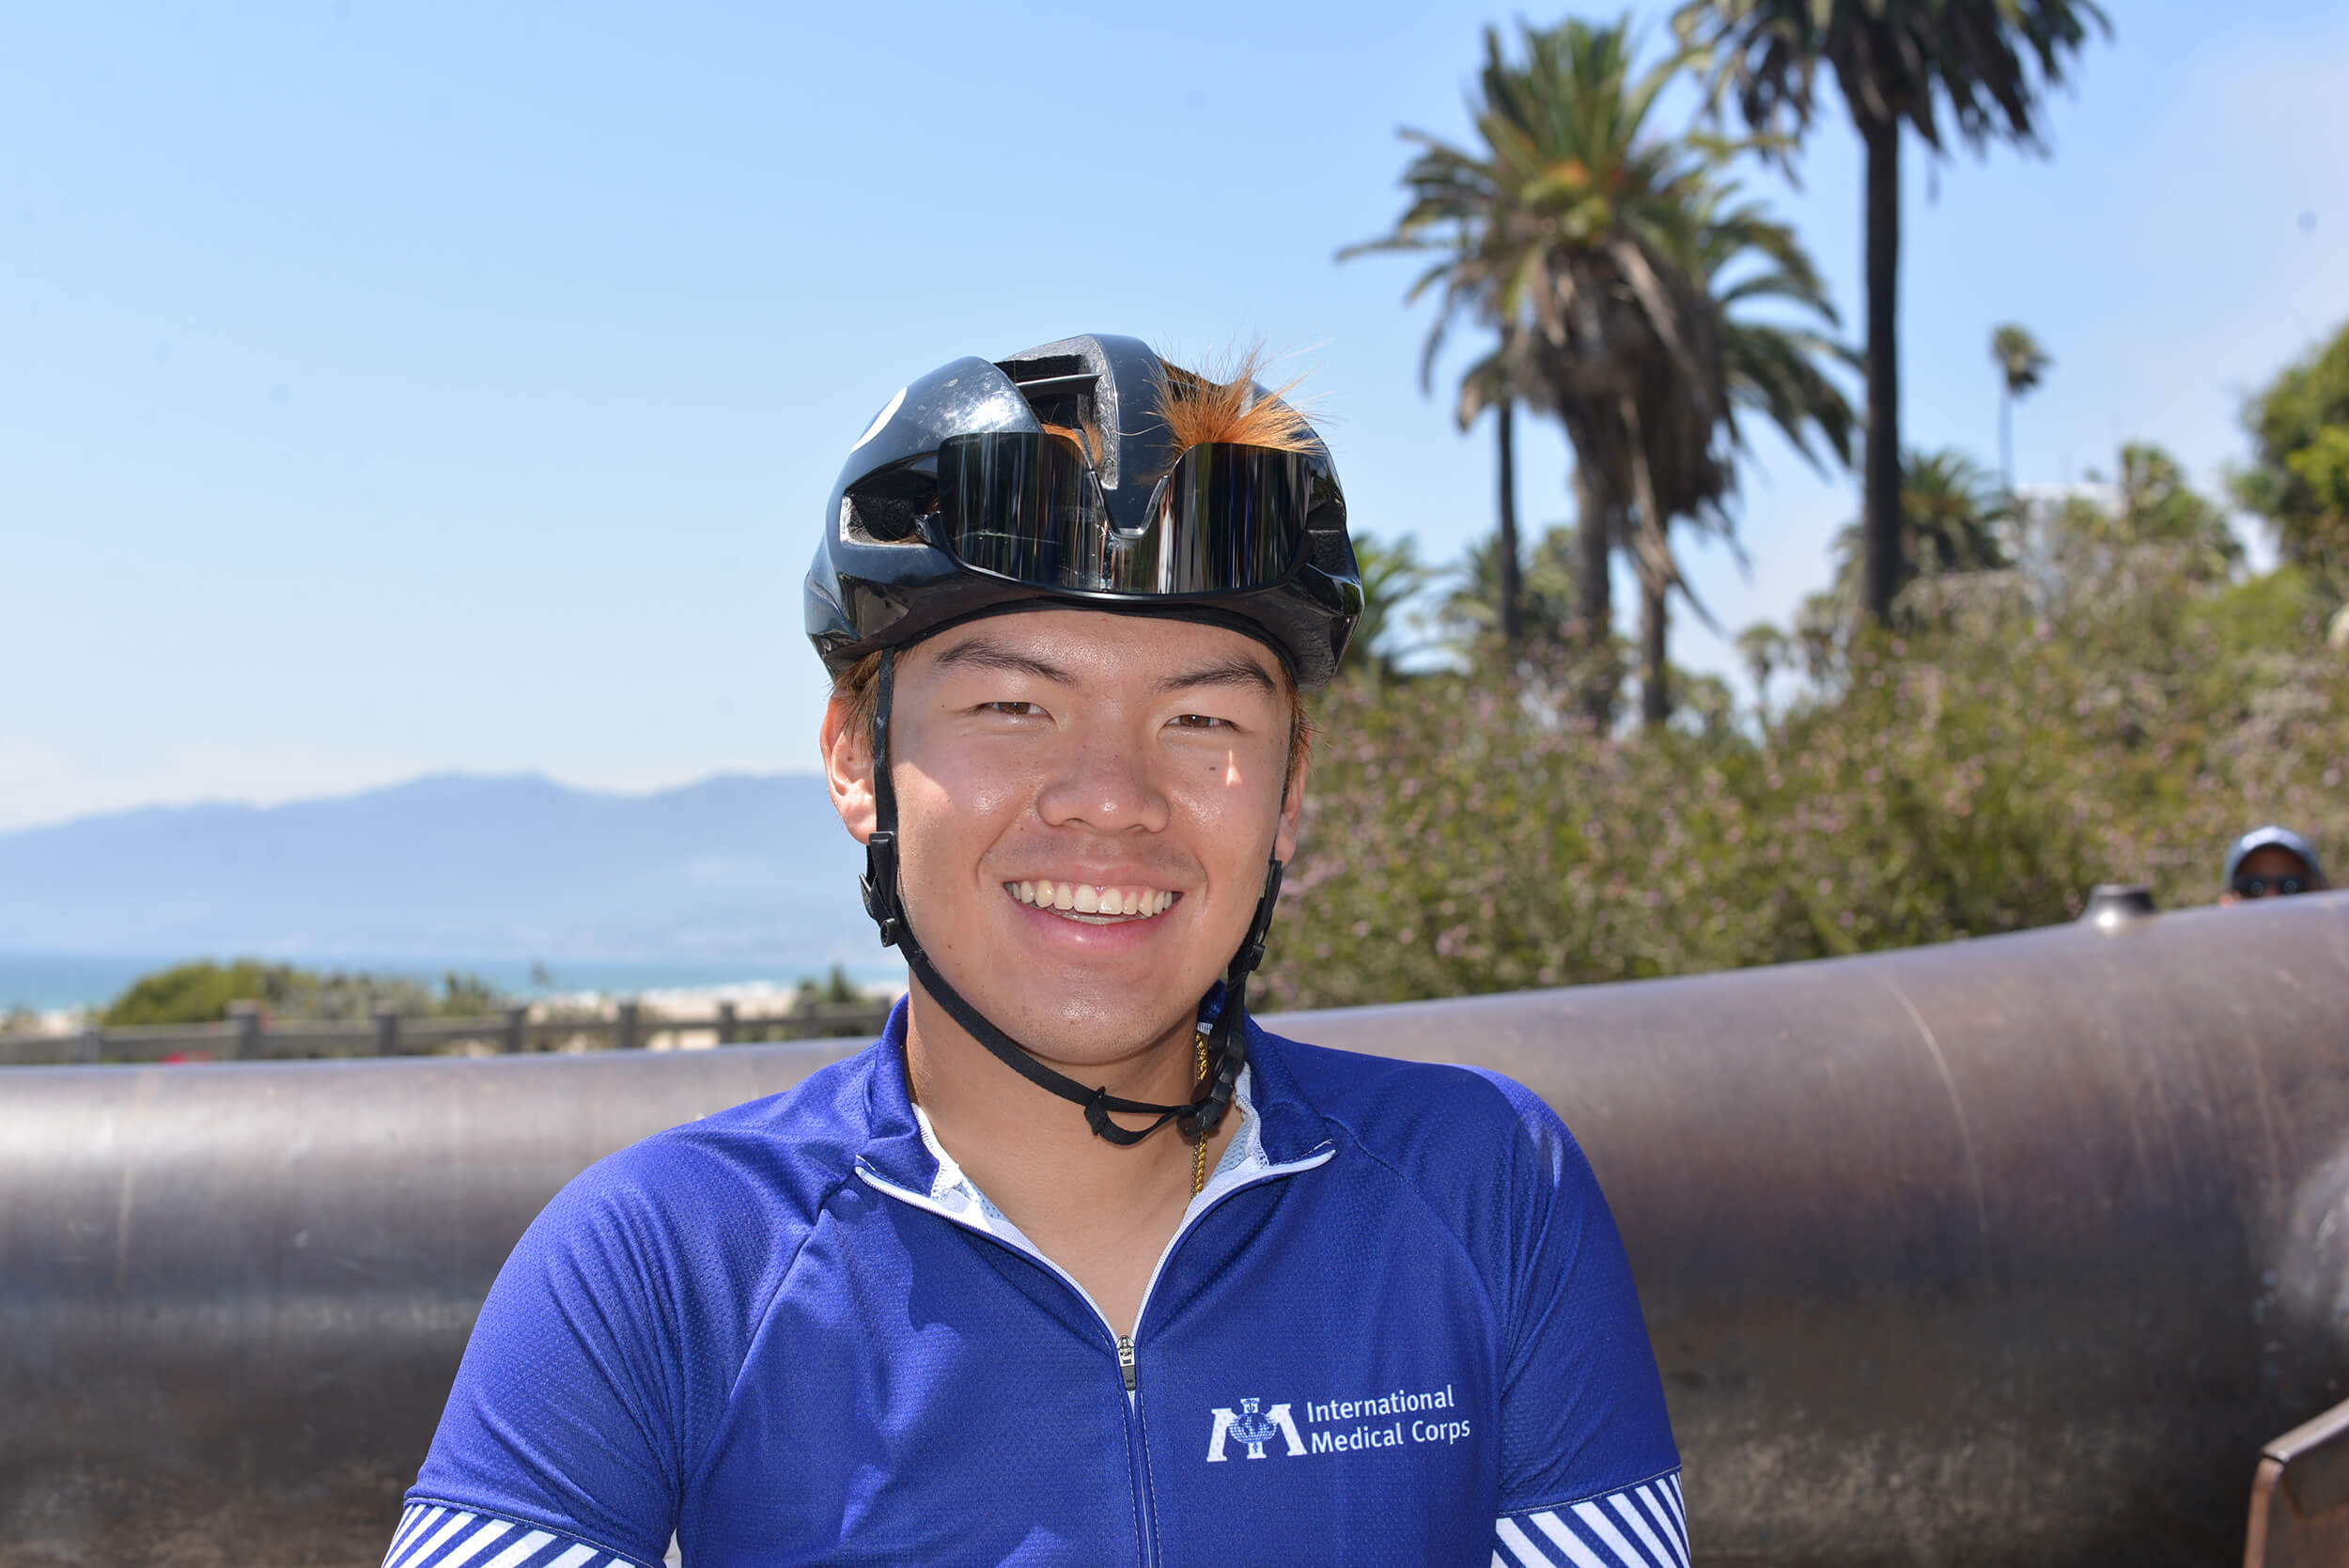 Nicolas Chien after his journey from New York to LA.